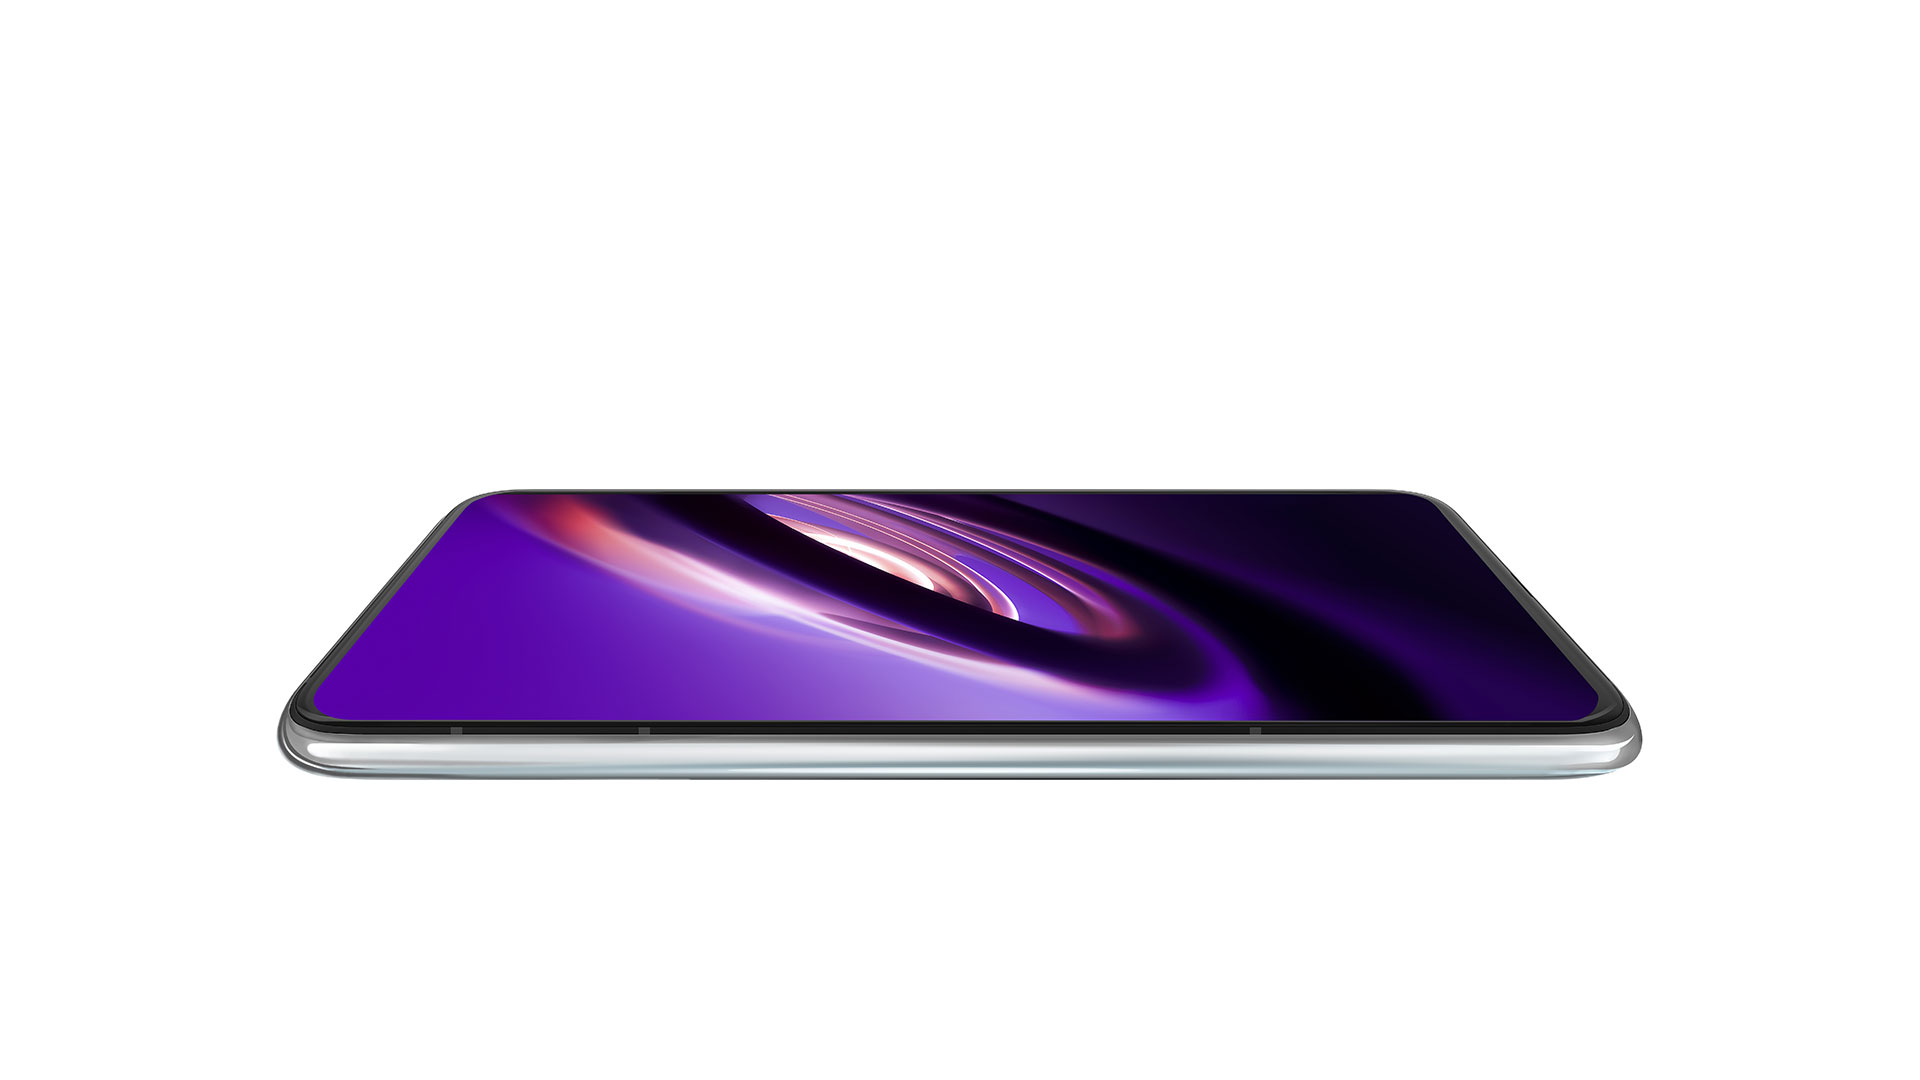 Sideview render of the vivo Apex 2019 concept